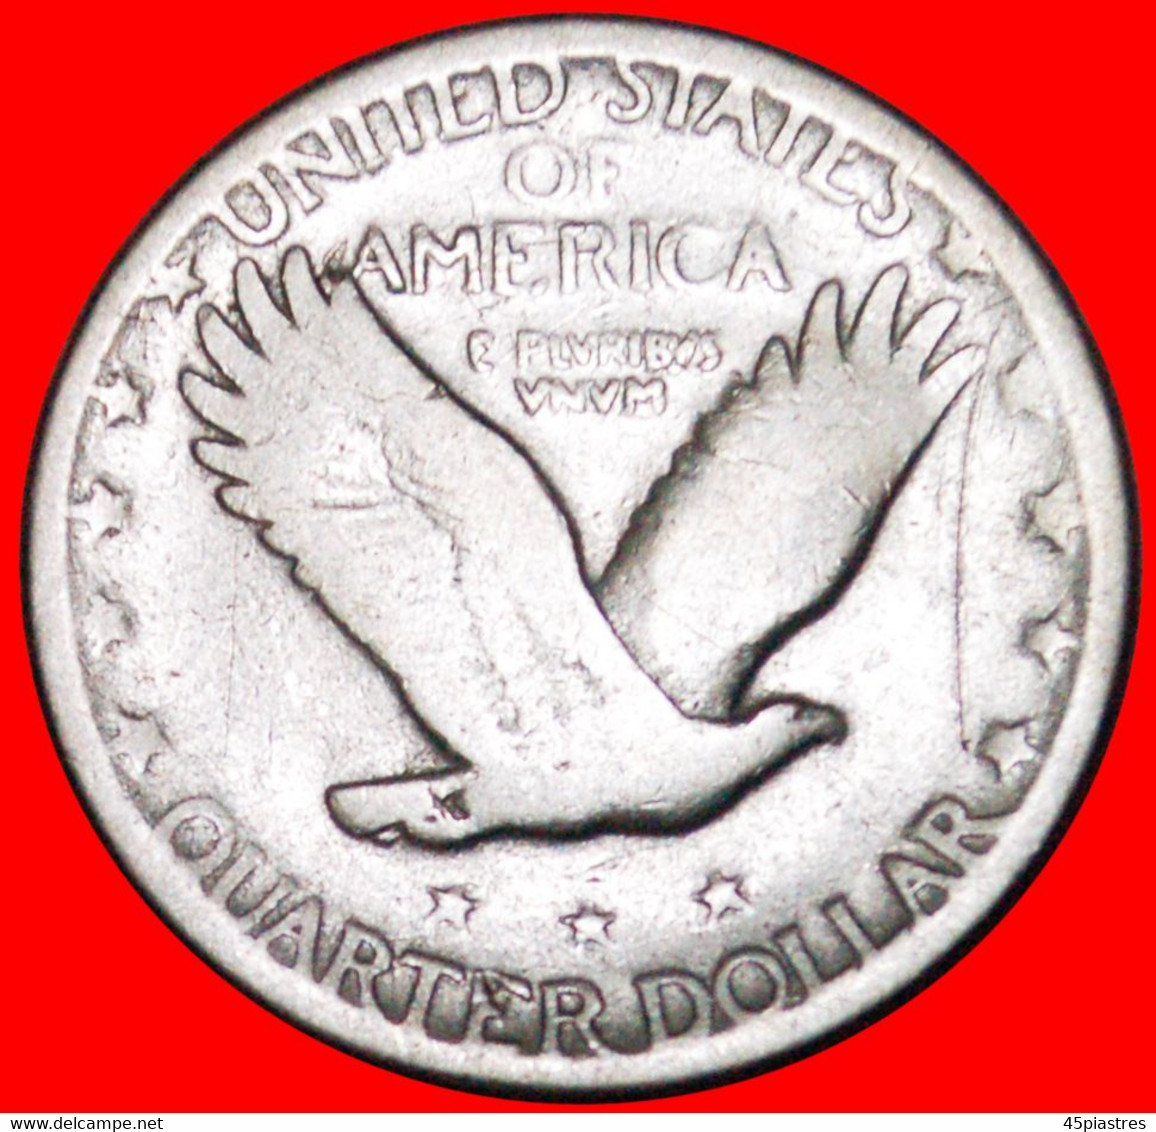 • SOLID SILVER (1917-1930): USA ★ 1/4 DOLLAR 1930 STANDING LIBERTY WITH EAGLE! LOW START ★ NO RESERVE! - 1916-1930: Standing Liberty